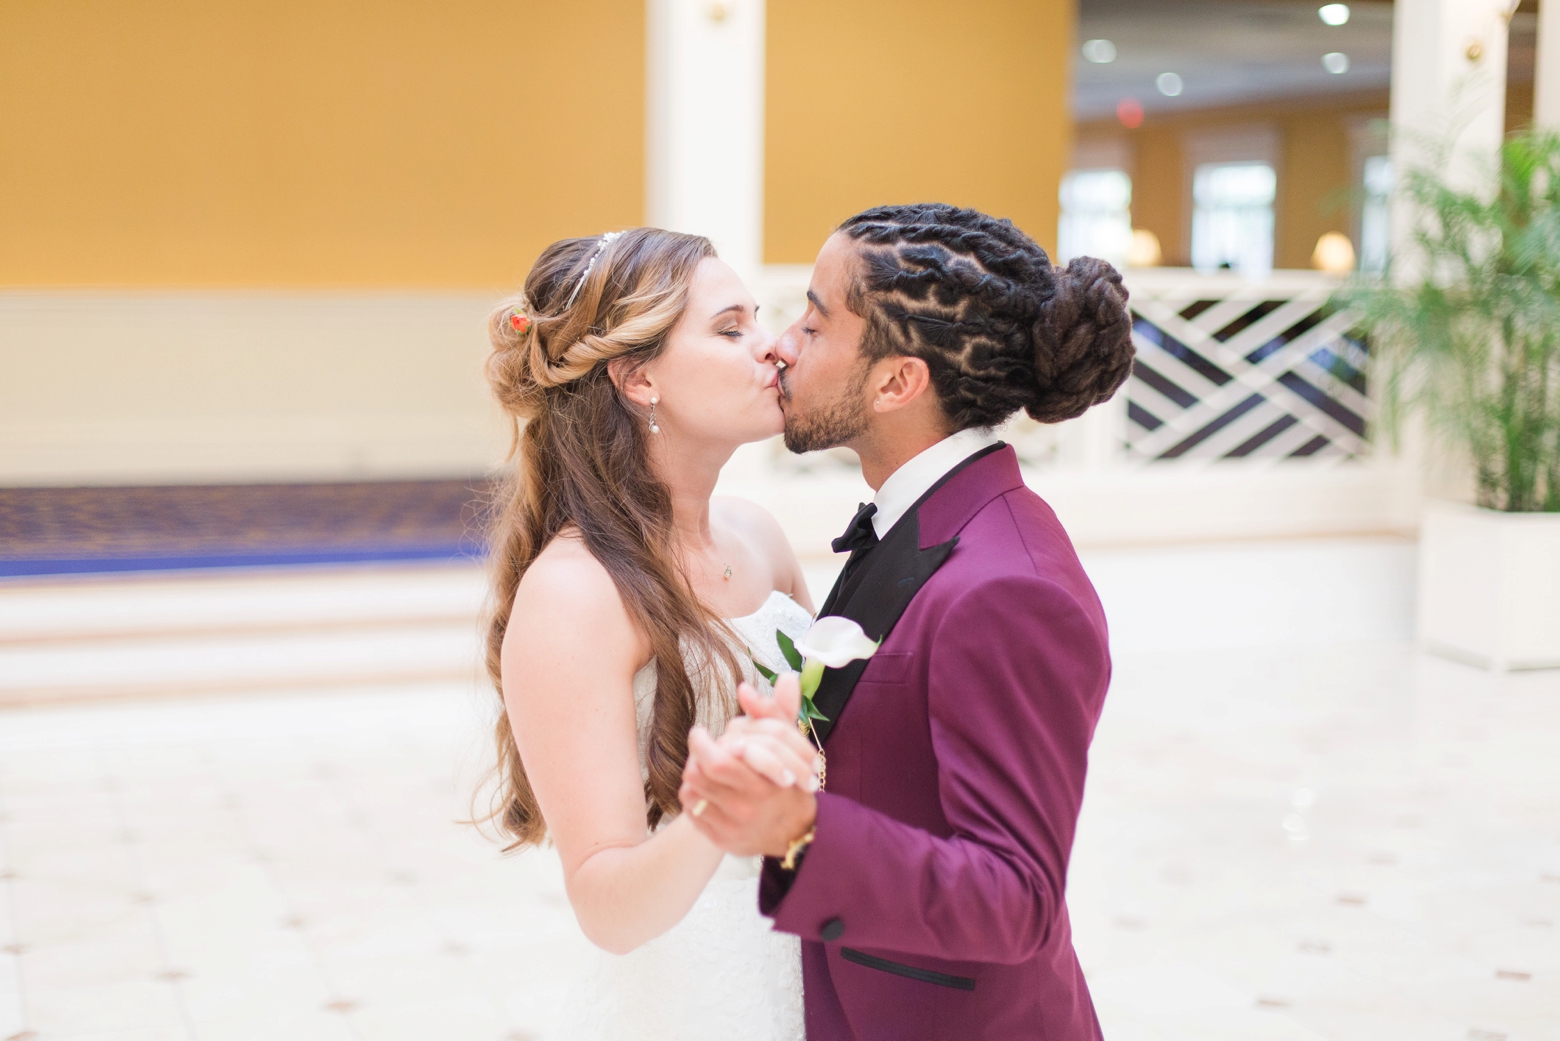  Founders Inn Wedding Virginia Beach by Angie McPherson Photography. Click through to see this Disney Tangled inspired wedding!